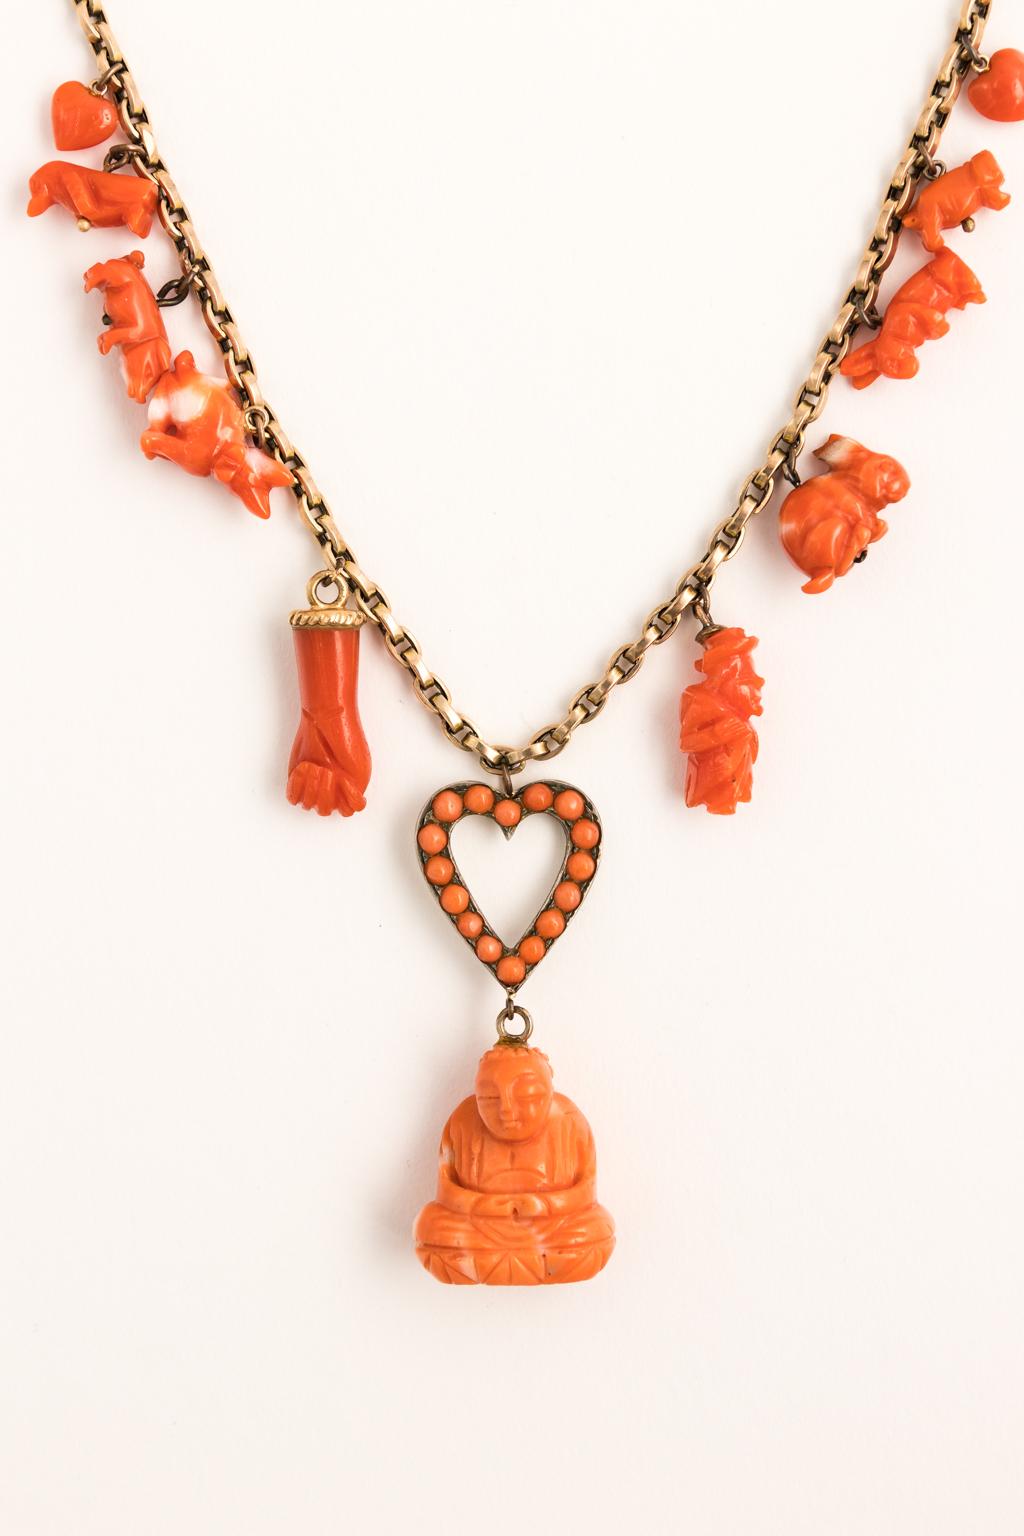 18 Karat Gold and Coral Buddha Charm Necklace In Good Condition For Sale In St.amford, CT